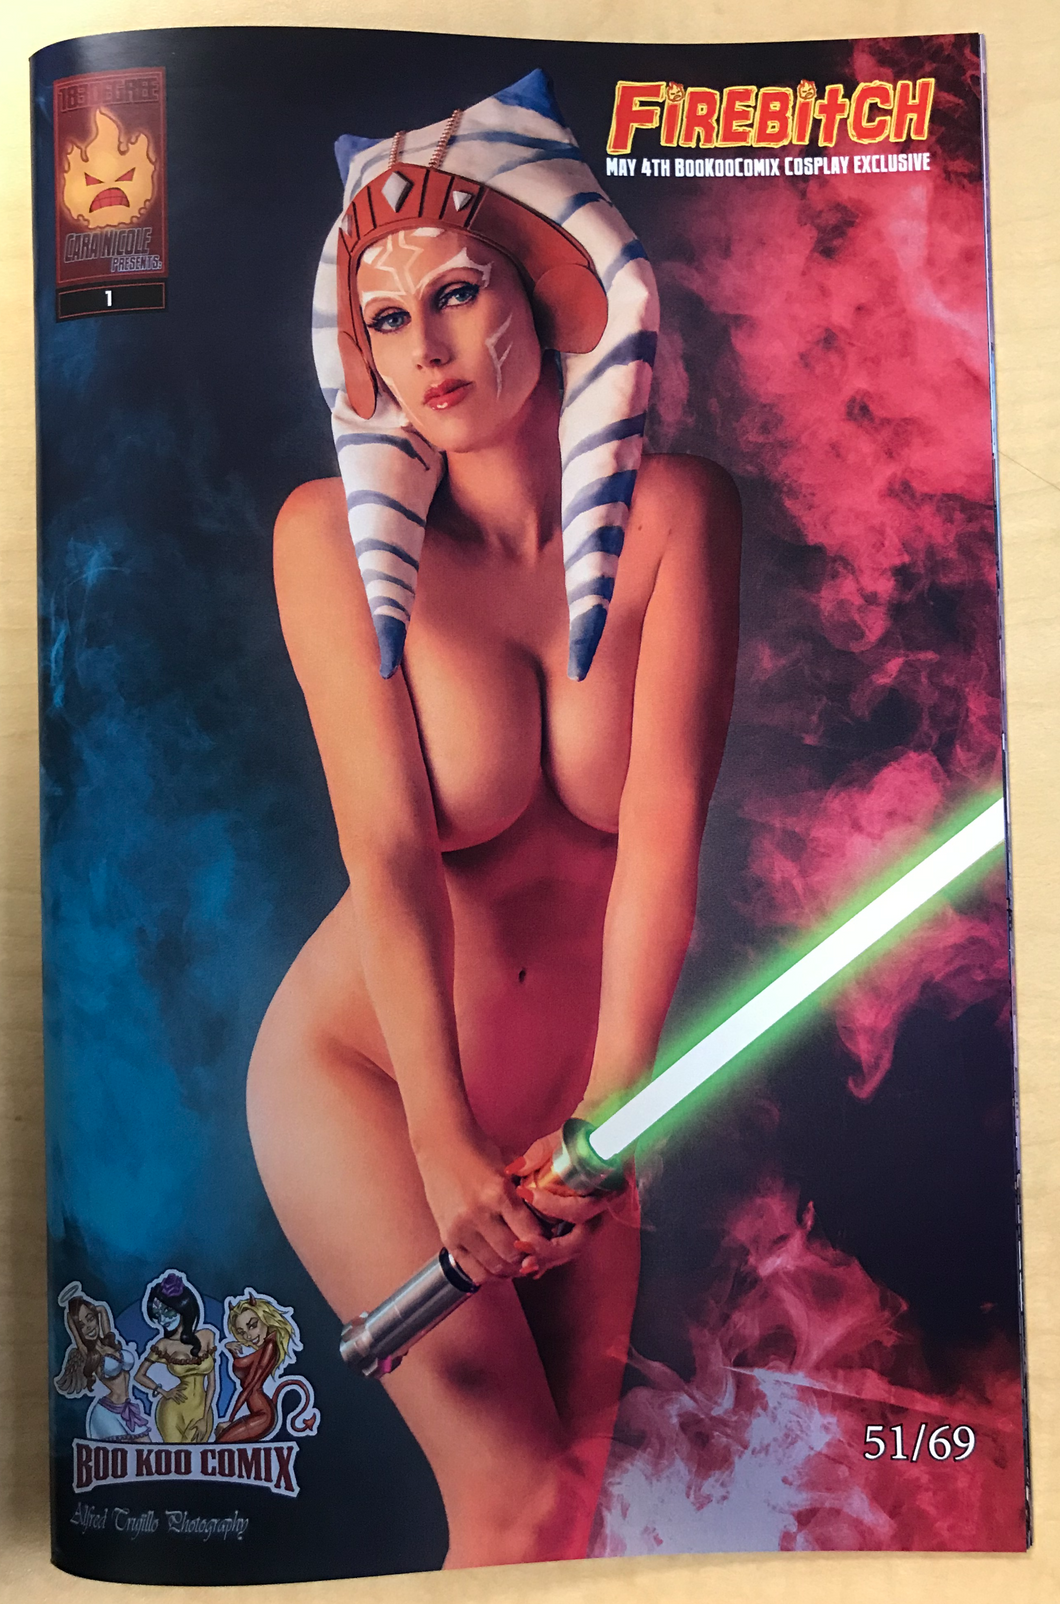 Firebitch #1 Cara Nicole Ahsoka Tano Cosplay May The 4th Be With You Variant Cover by Cara Nicole & Alfred Trujillo BooKooComix Exclusive Edition Limited to 69 Serial Numbered Copies Worldwide!!!